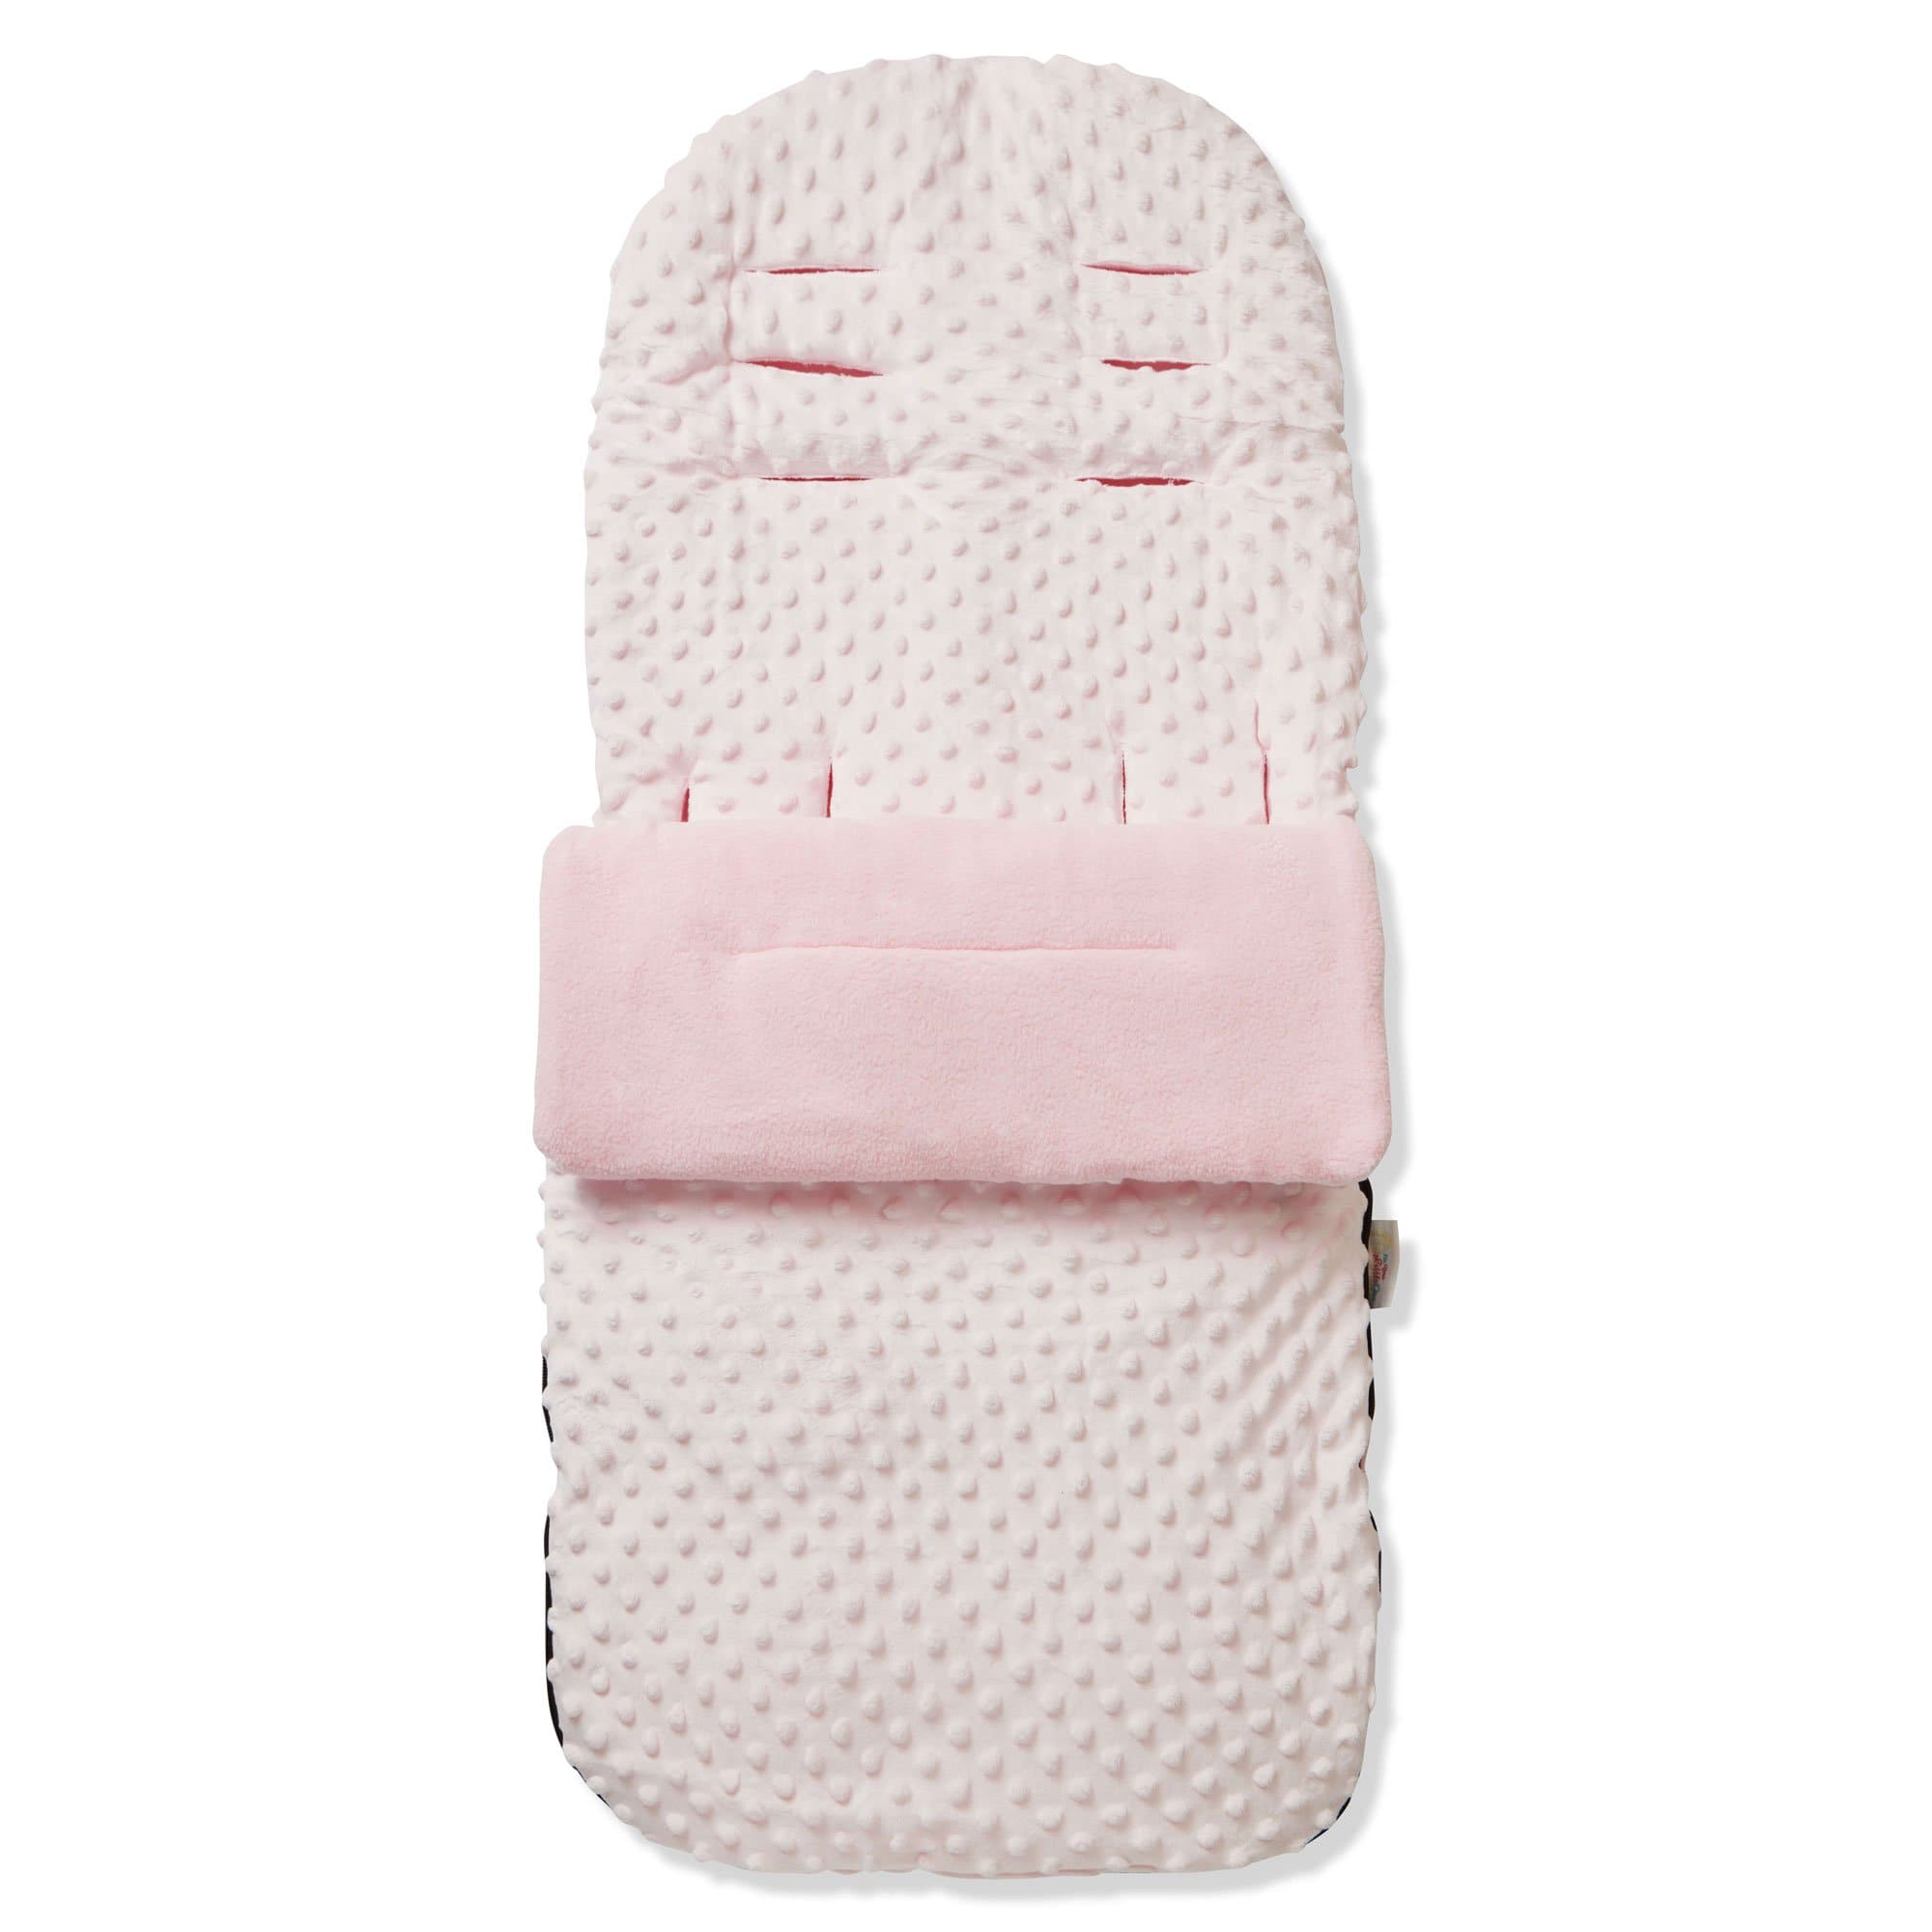 Dimple Footmuff / Cosy Toes Compatible with BOB - For Your Little One